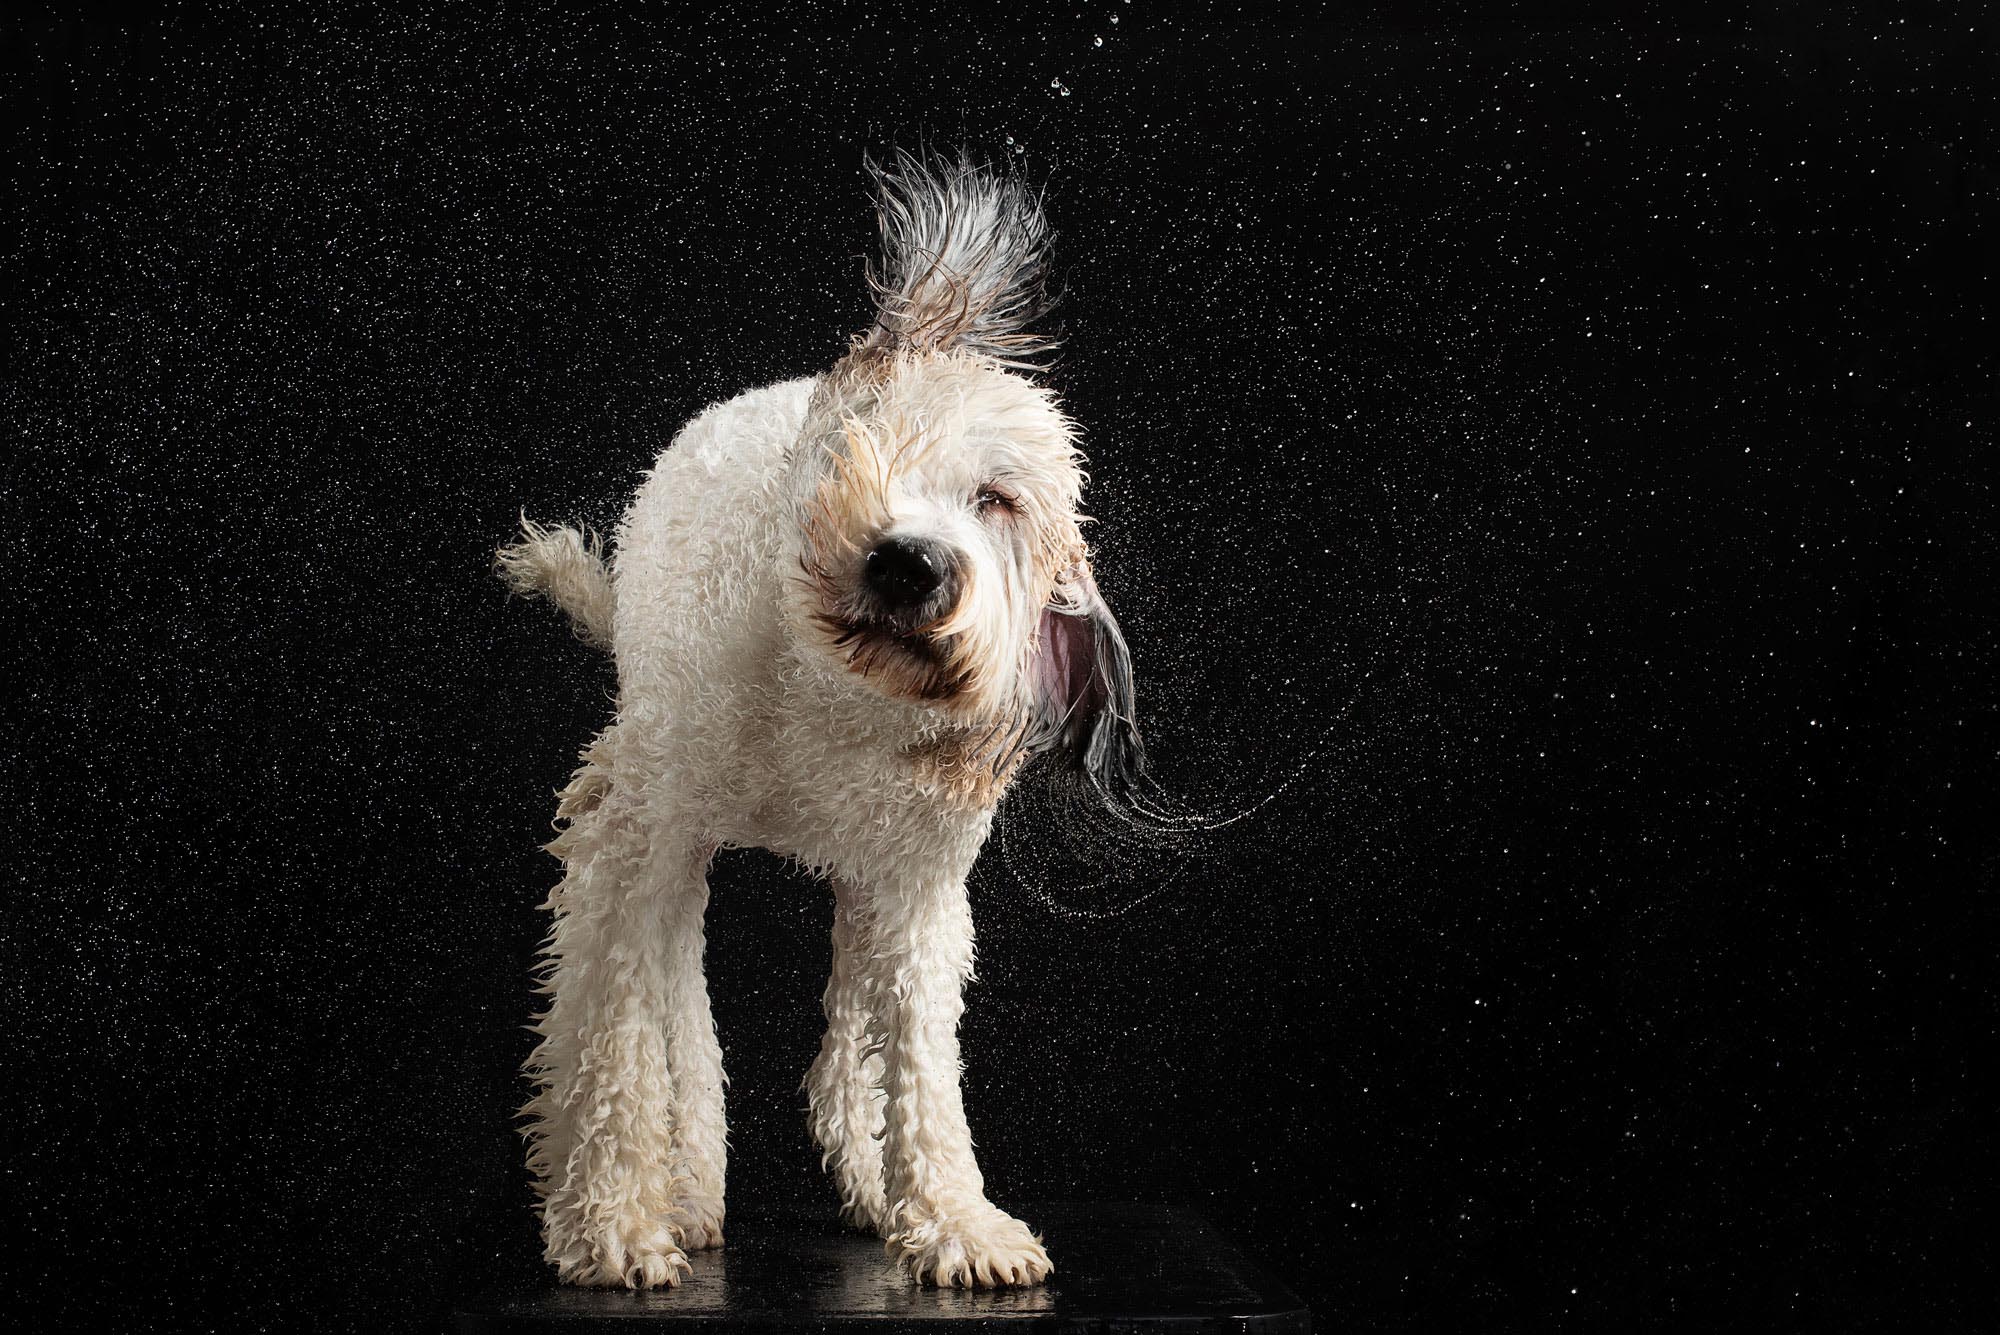 Dog shaking off water in a beautiful motion portrait, part of Windy Paws dog photography series by Candice C. Cusic